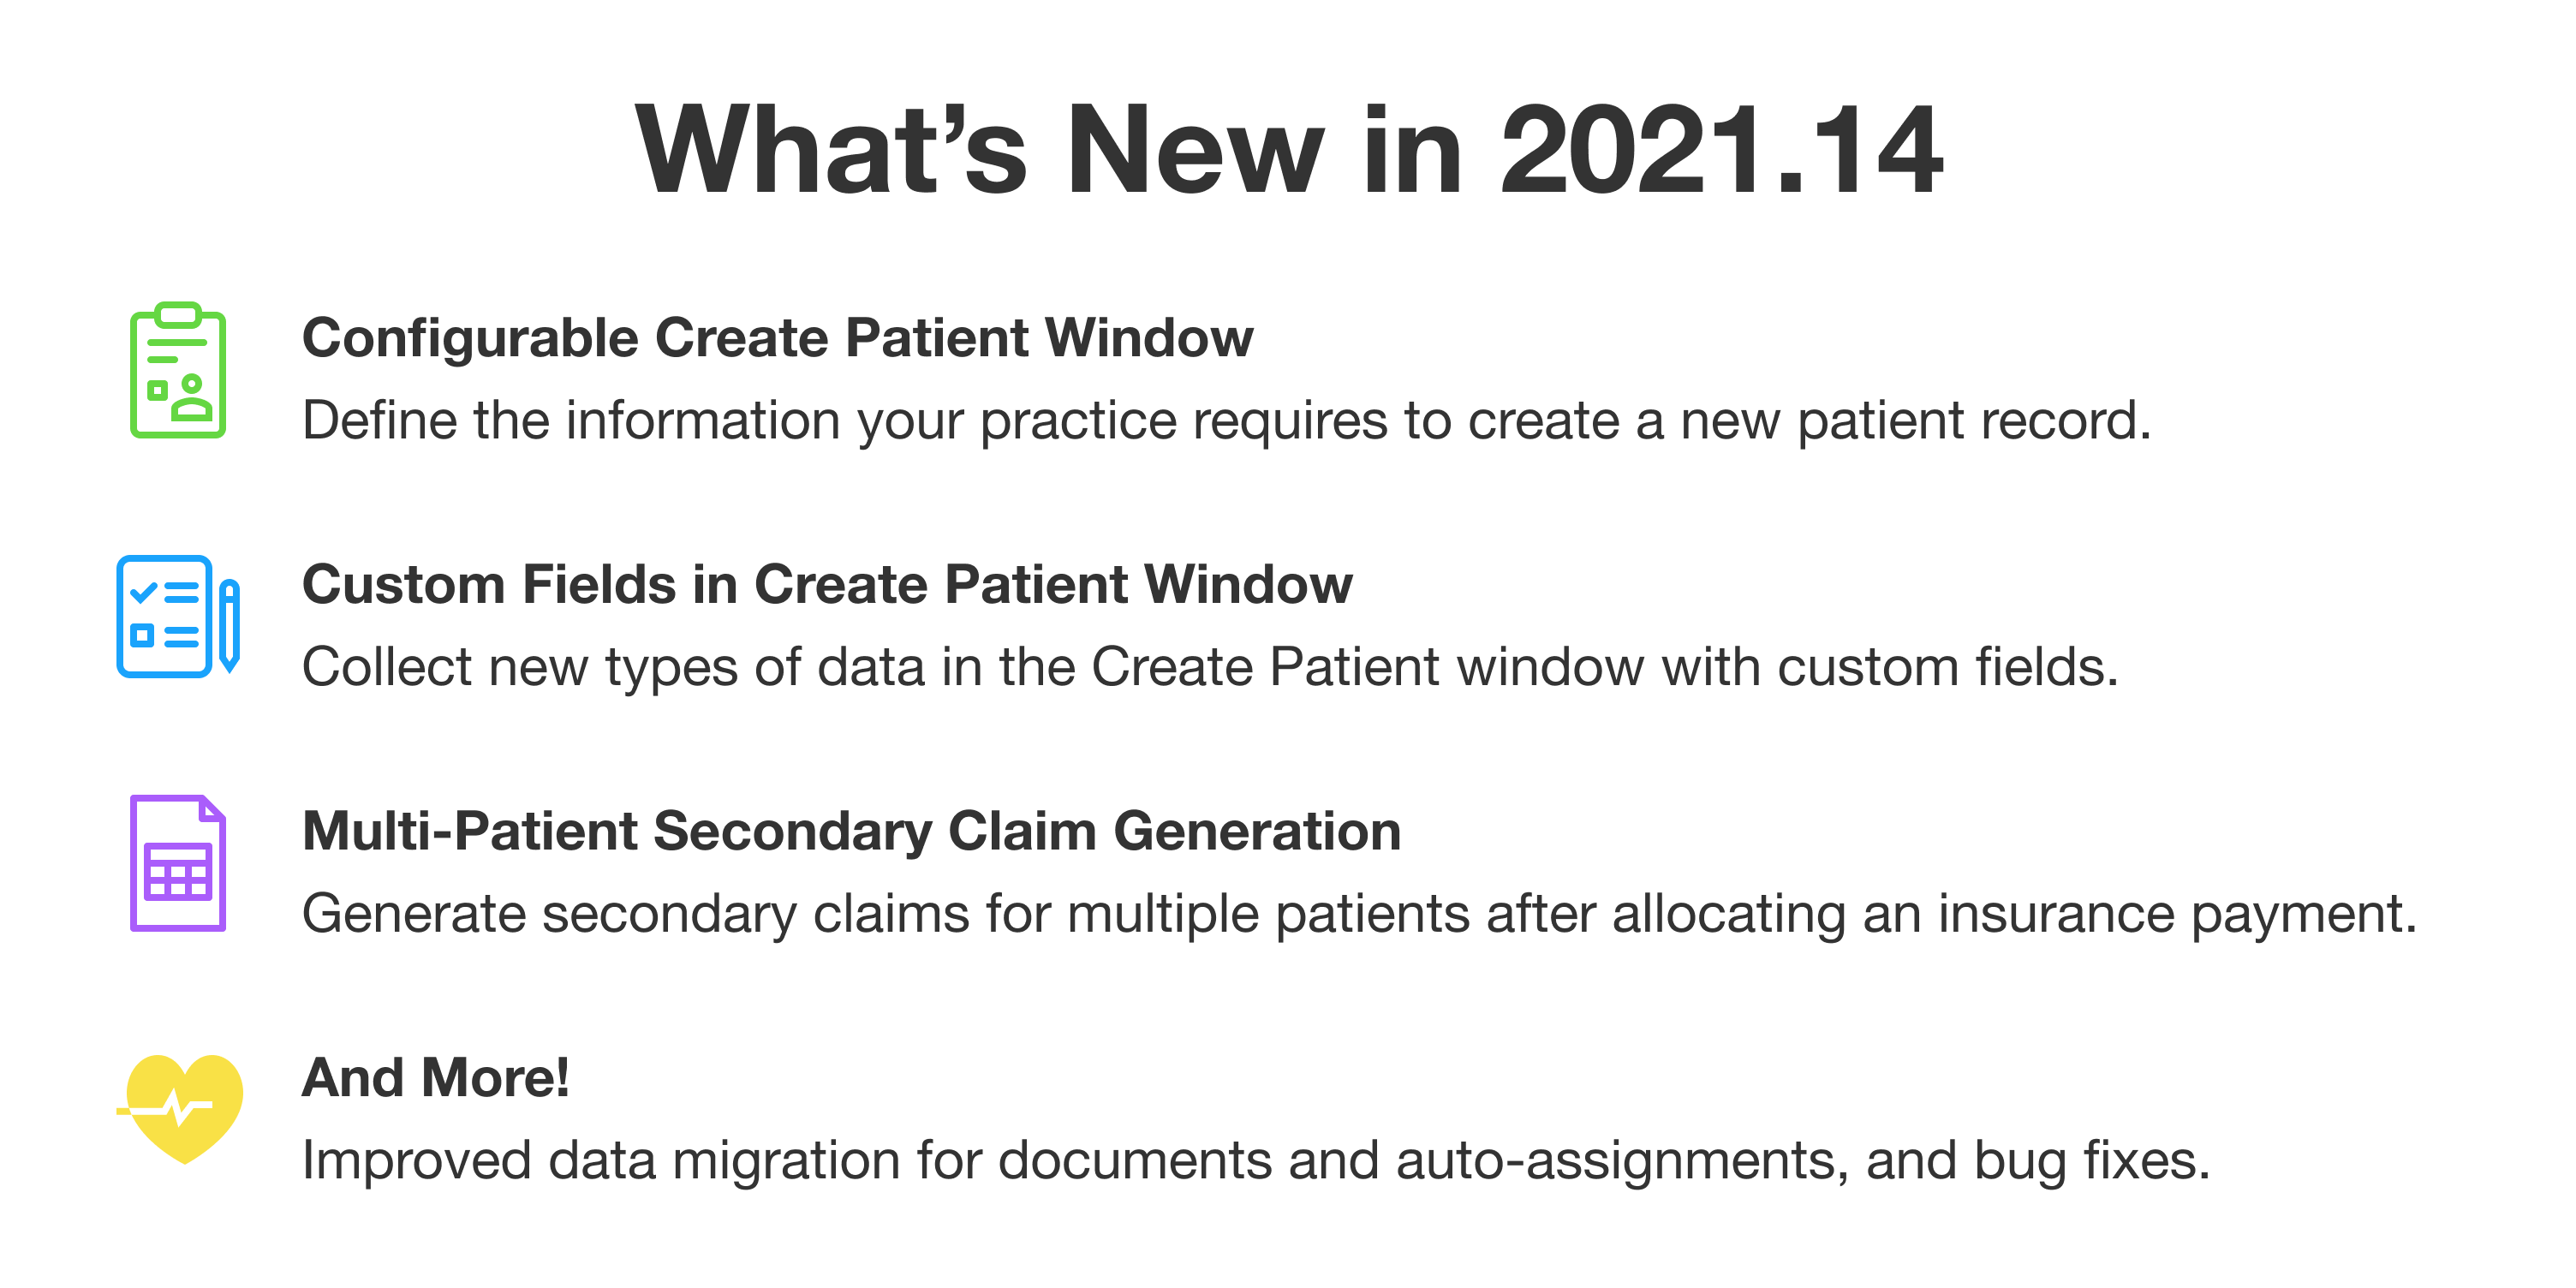 What's New in 2021.14. First: Configurable Create Patient Window. Define the information your practice requires to create a new patient record. Second: Custom Fields in Create Patient Window. Collect new types of data in the Create Patient window with custom fields. Third: Multi-Patient Secondary Claim Generation. Generate secondary claims for multiple patients after allocating an insurance payment. And More: Improved data migration for documents and auto-assignments, and bug fixes.